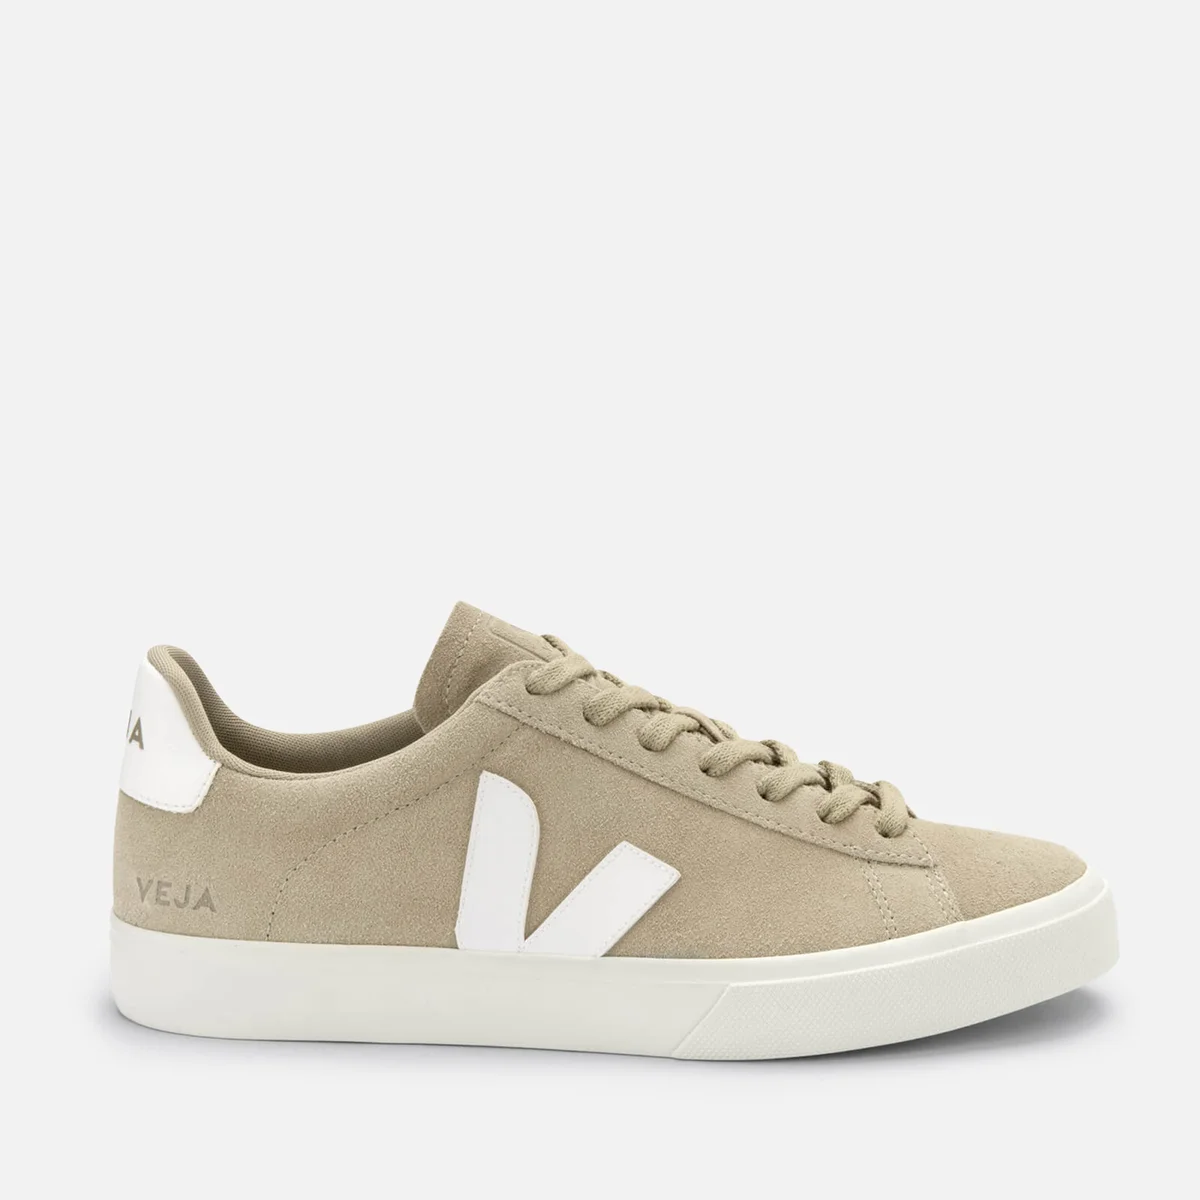 Veja Campo Leather-Trimmed Suede Trainers Image 1